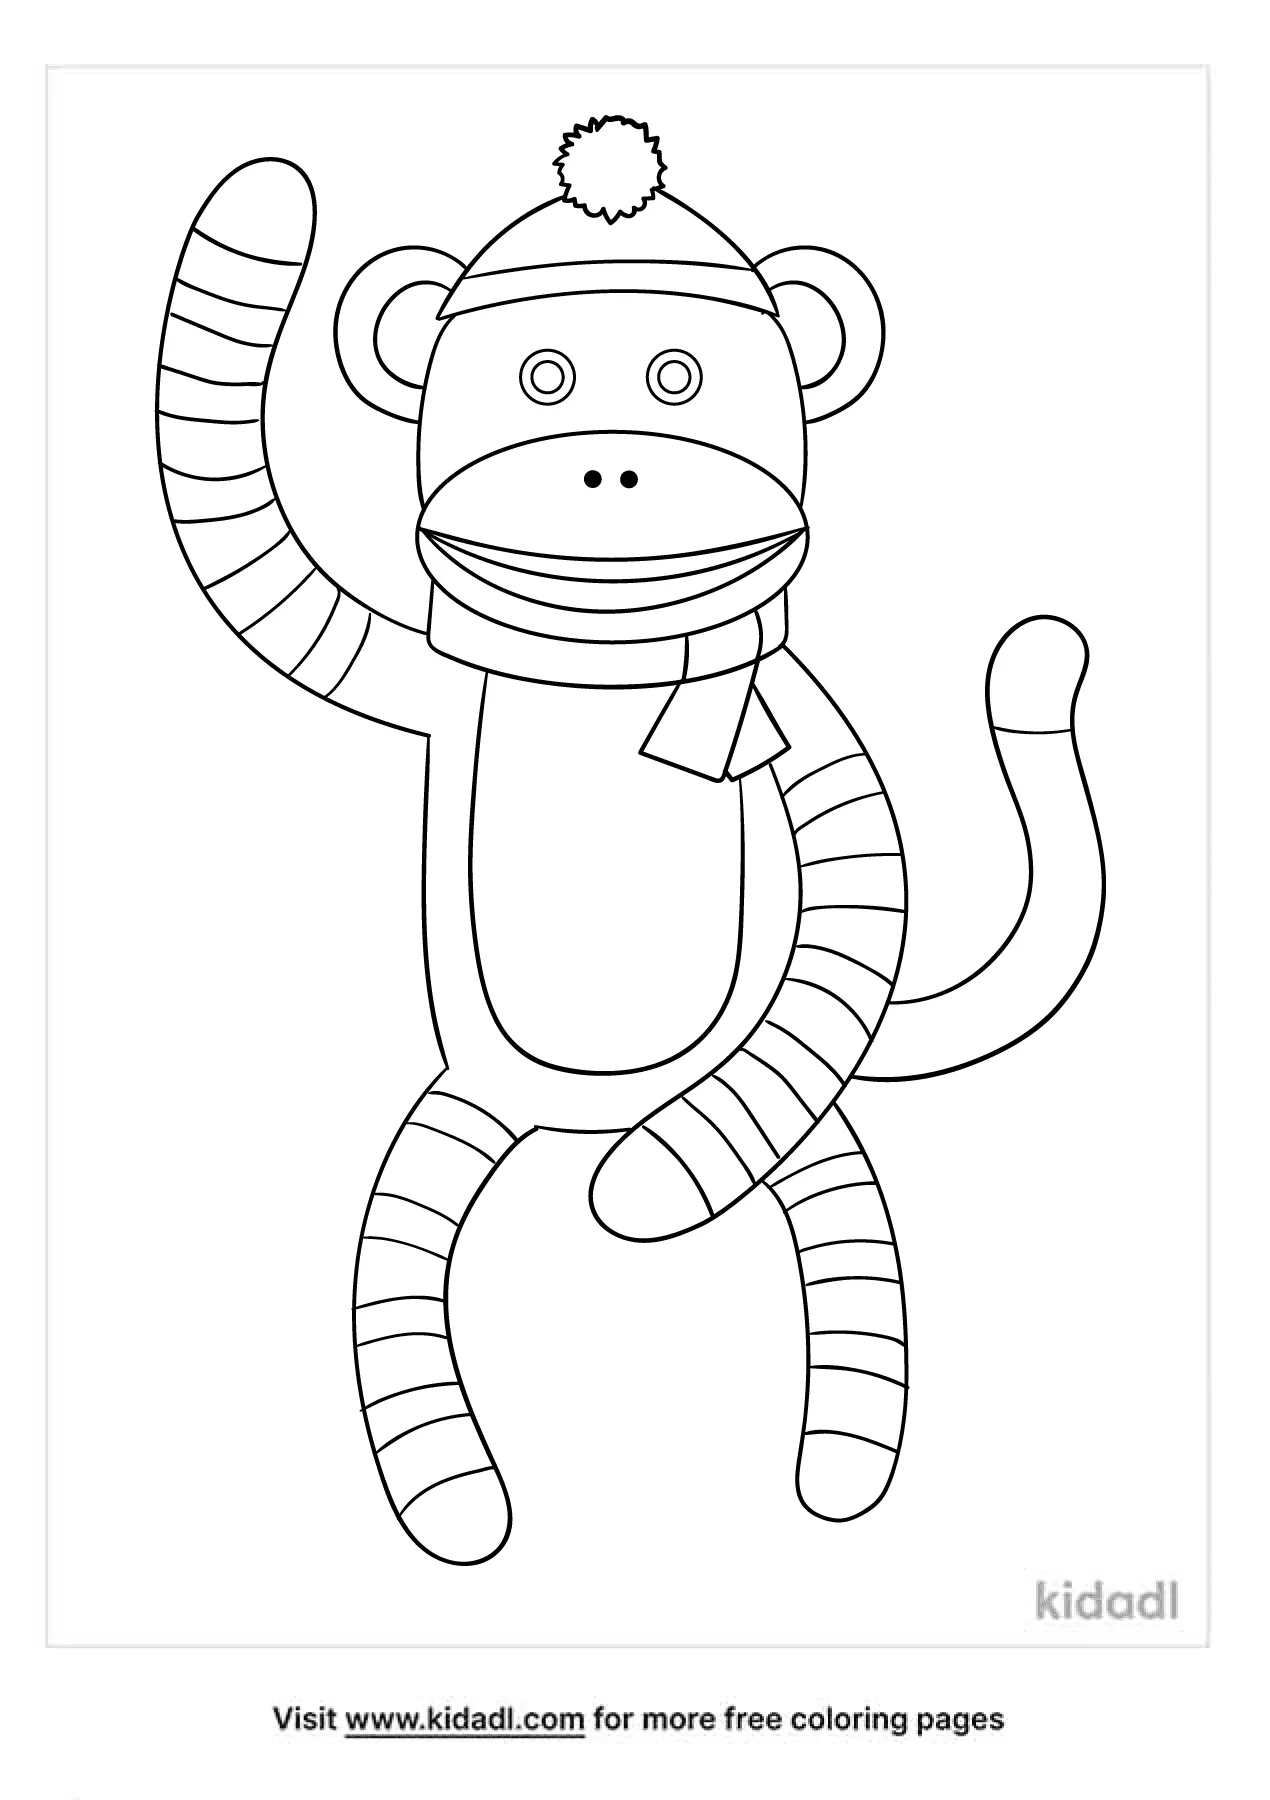 Sock Monkey Coloring Pages Free At Home Coloring Pages Kidadl